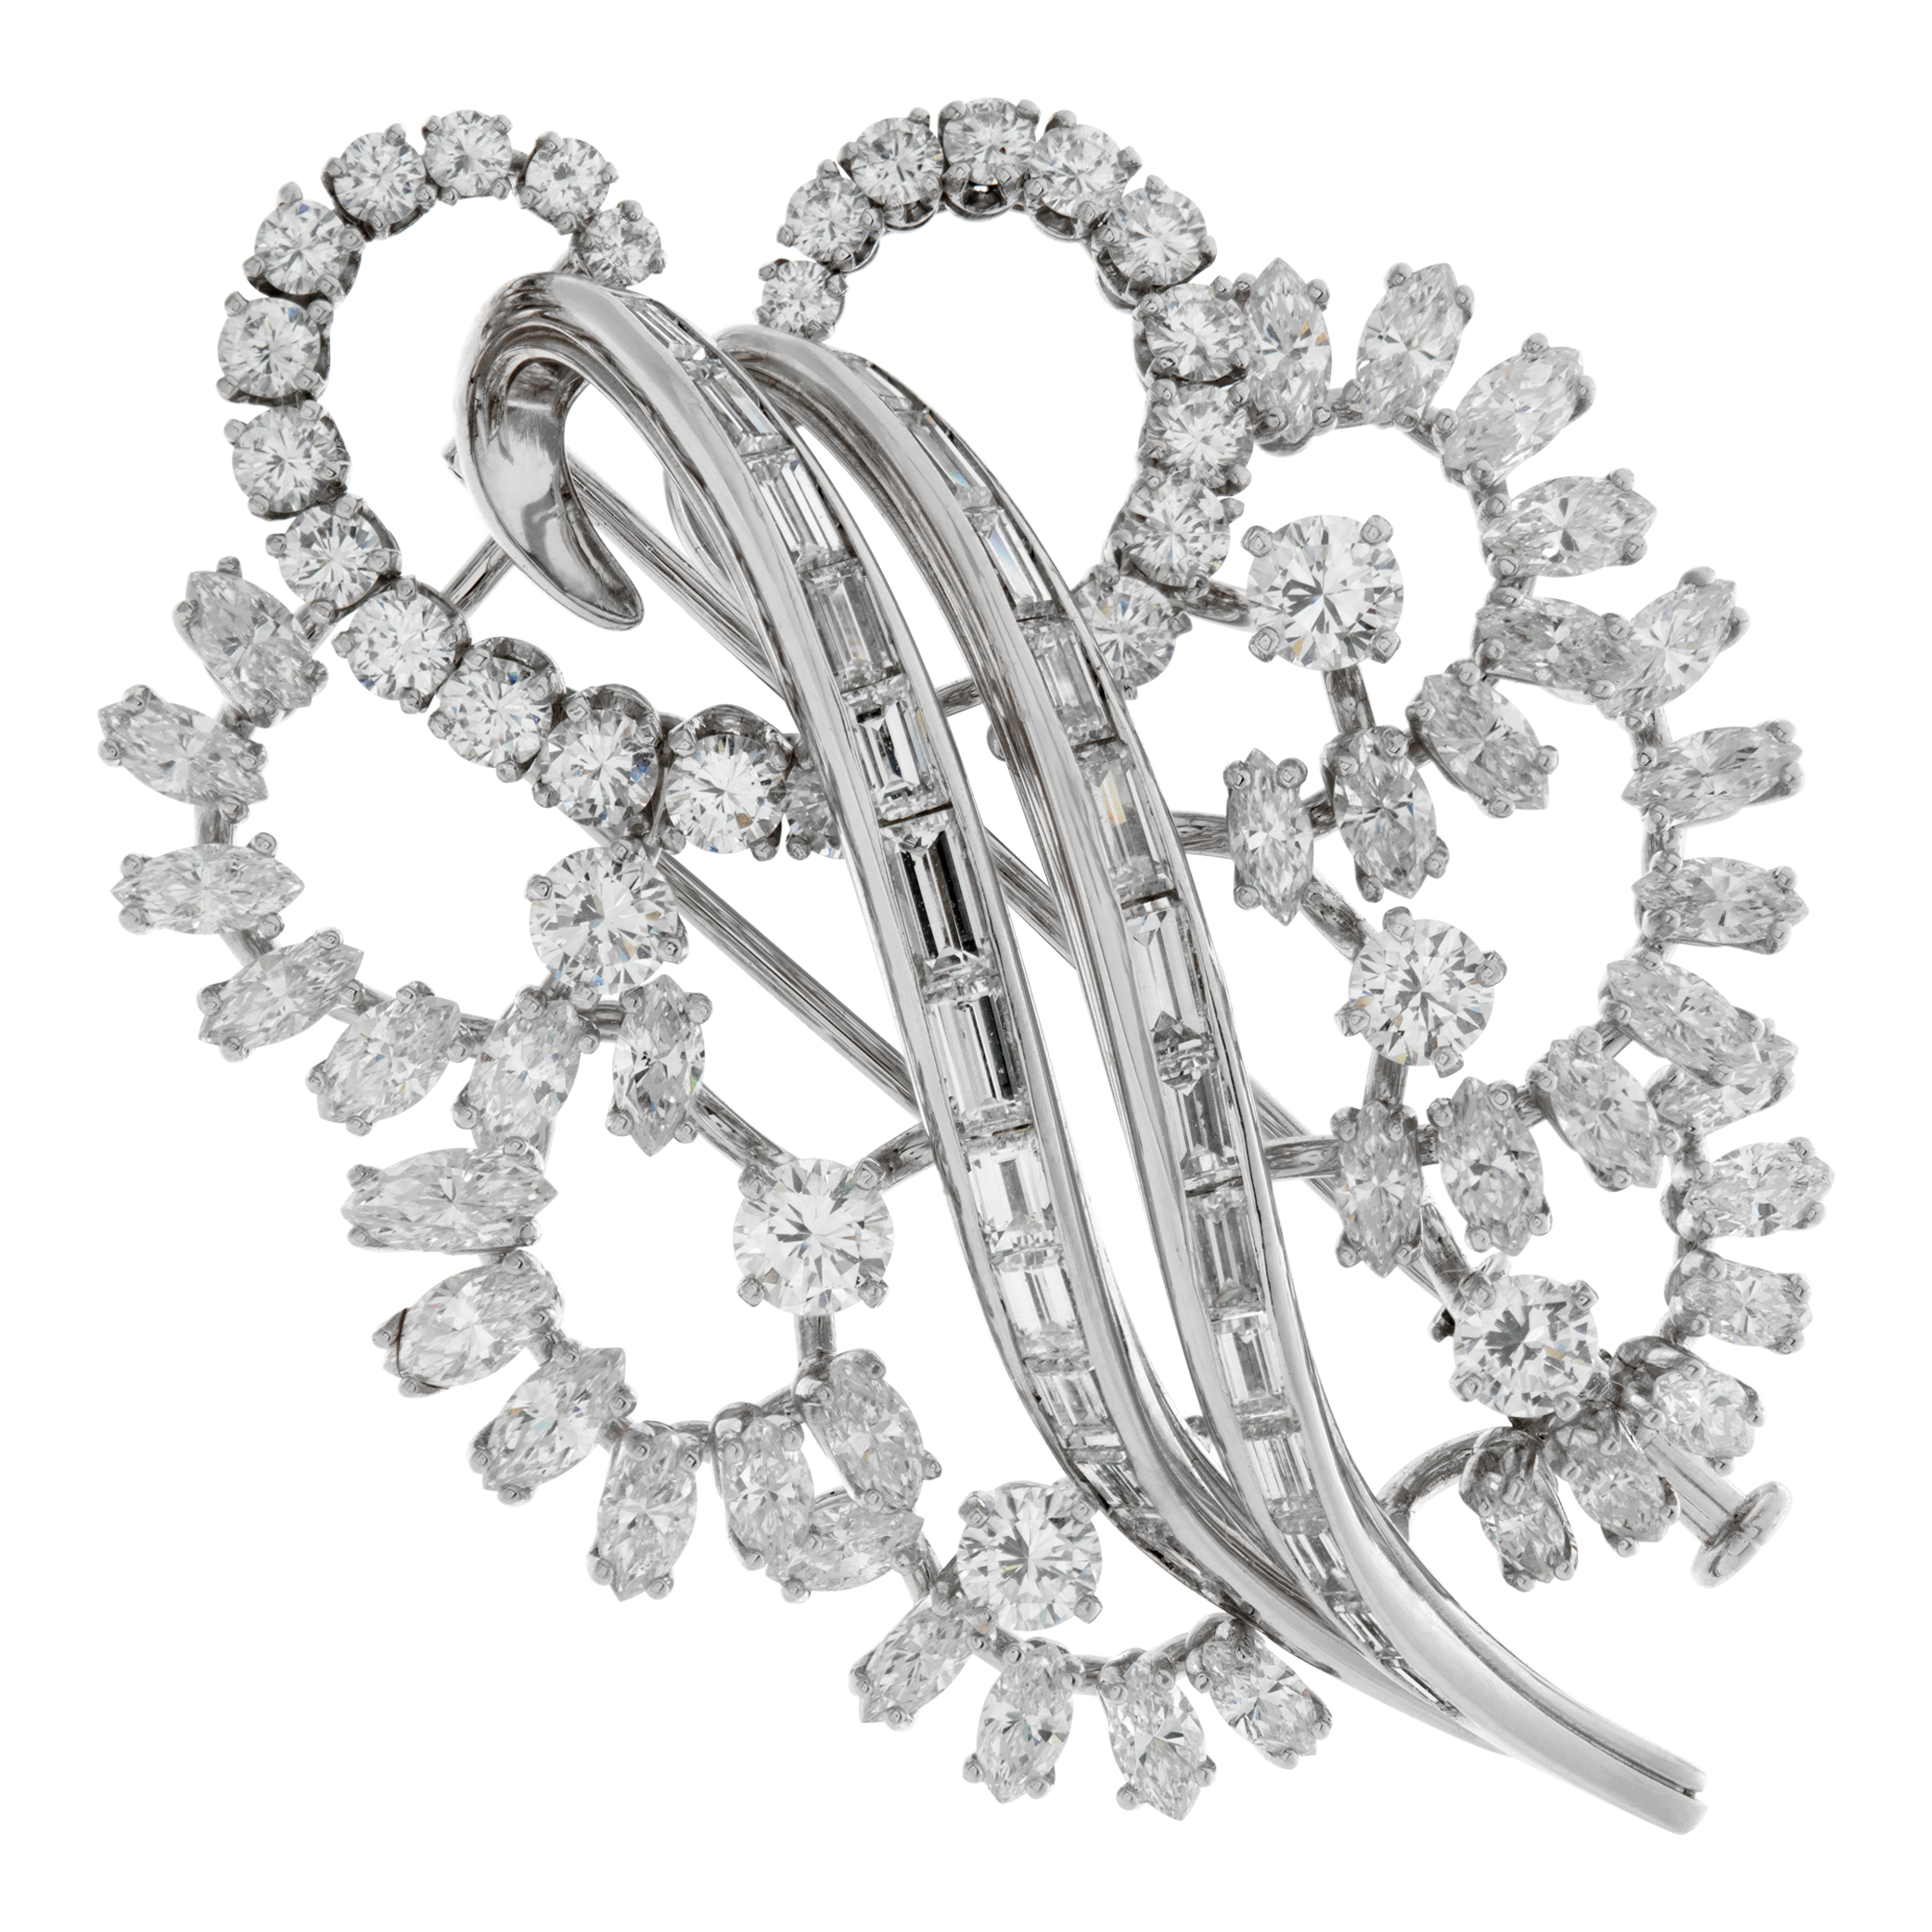 Baguette, Marquise & Round Brilliant Cut Diamonds Brooch In 18k White Gold. Approx. 3.00 Carats.